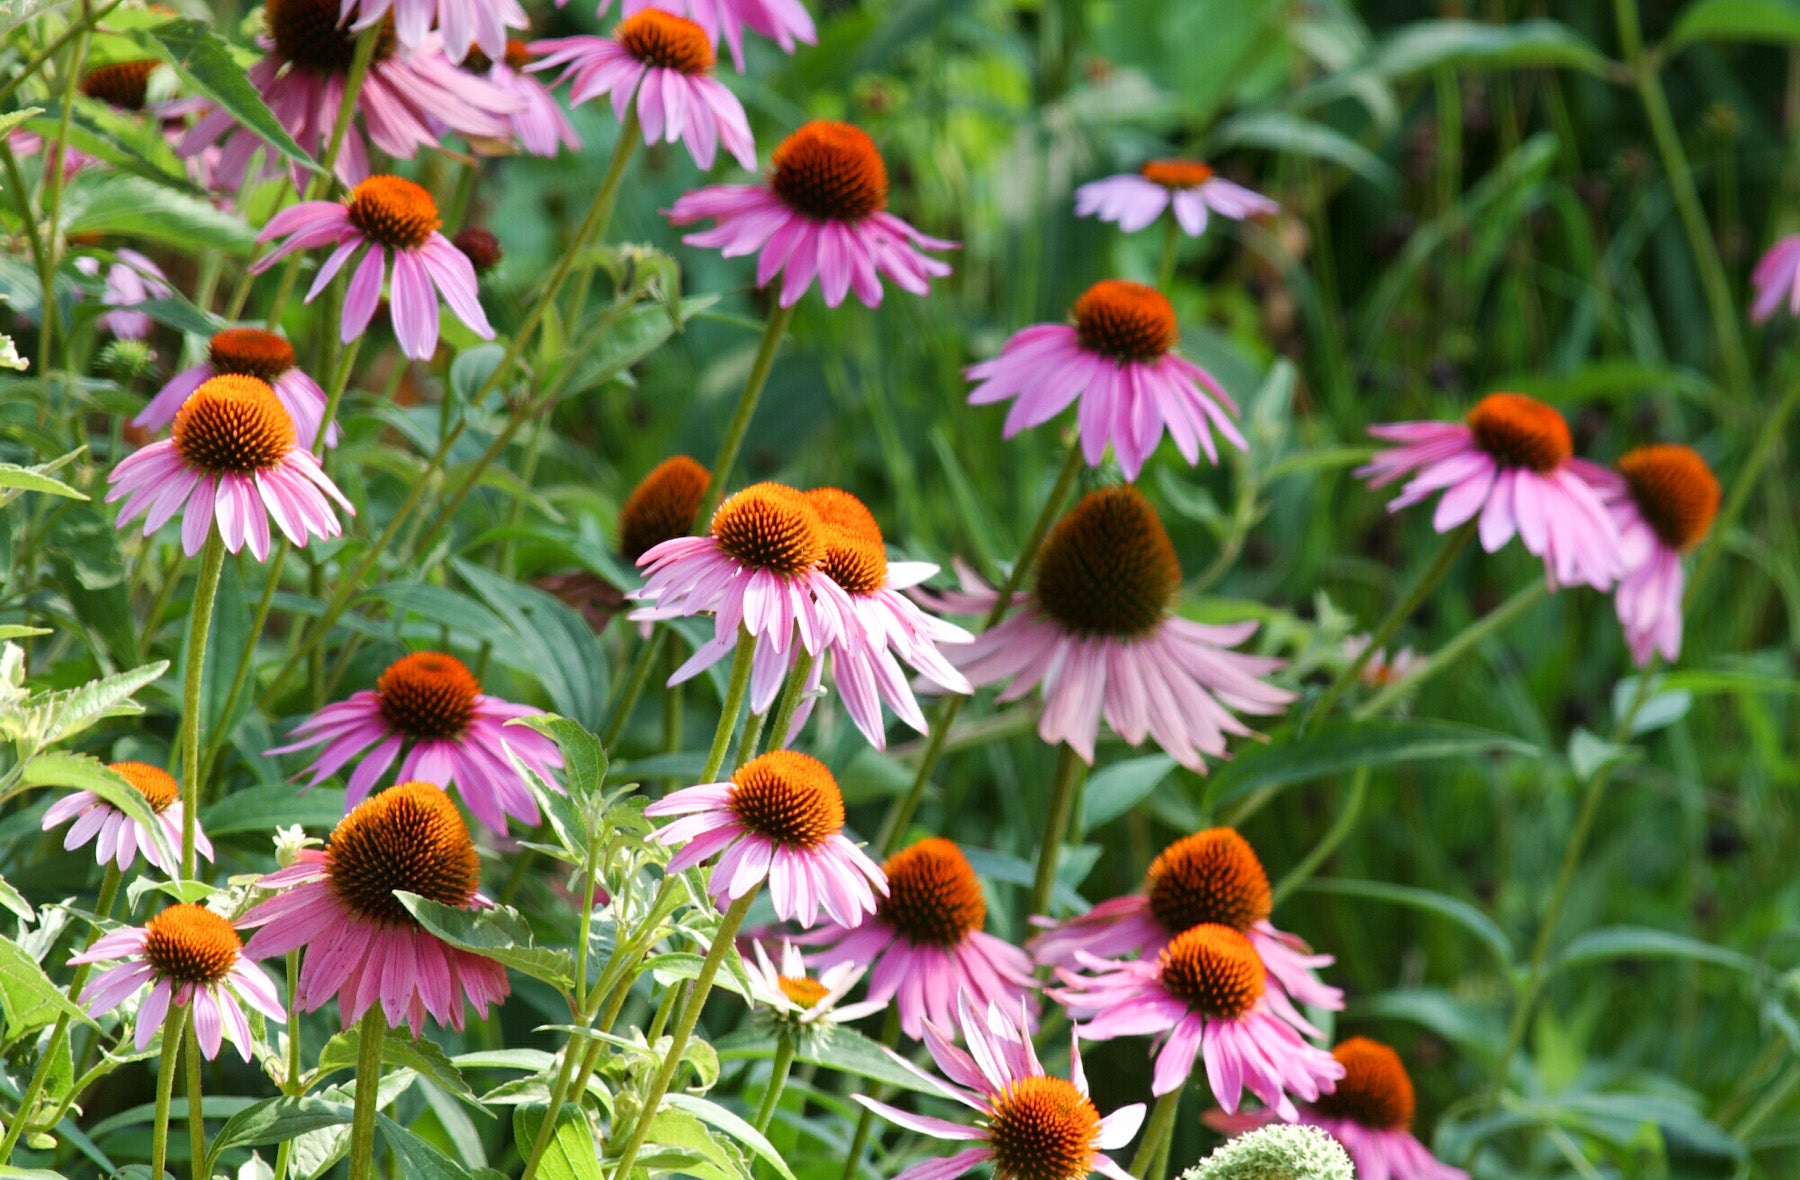 Photo of several purple coneflower plants in bloom